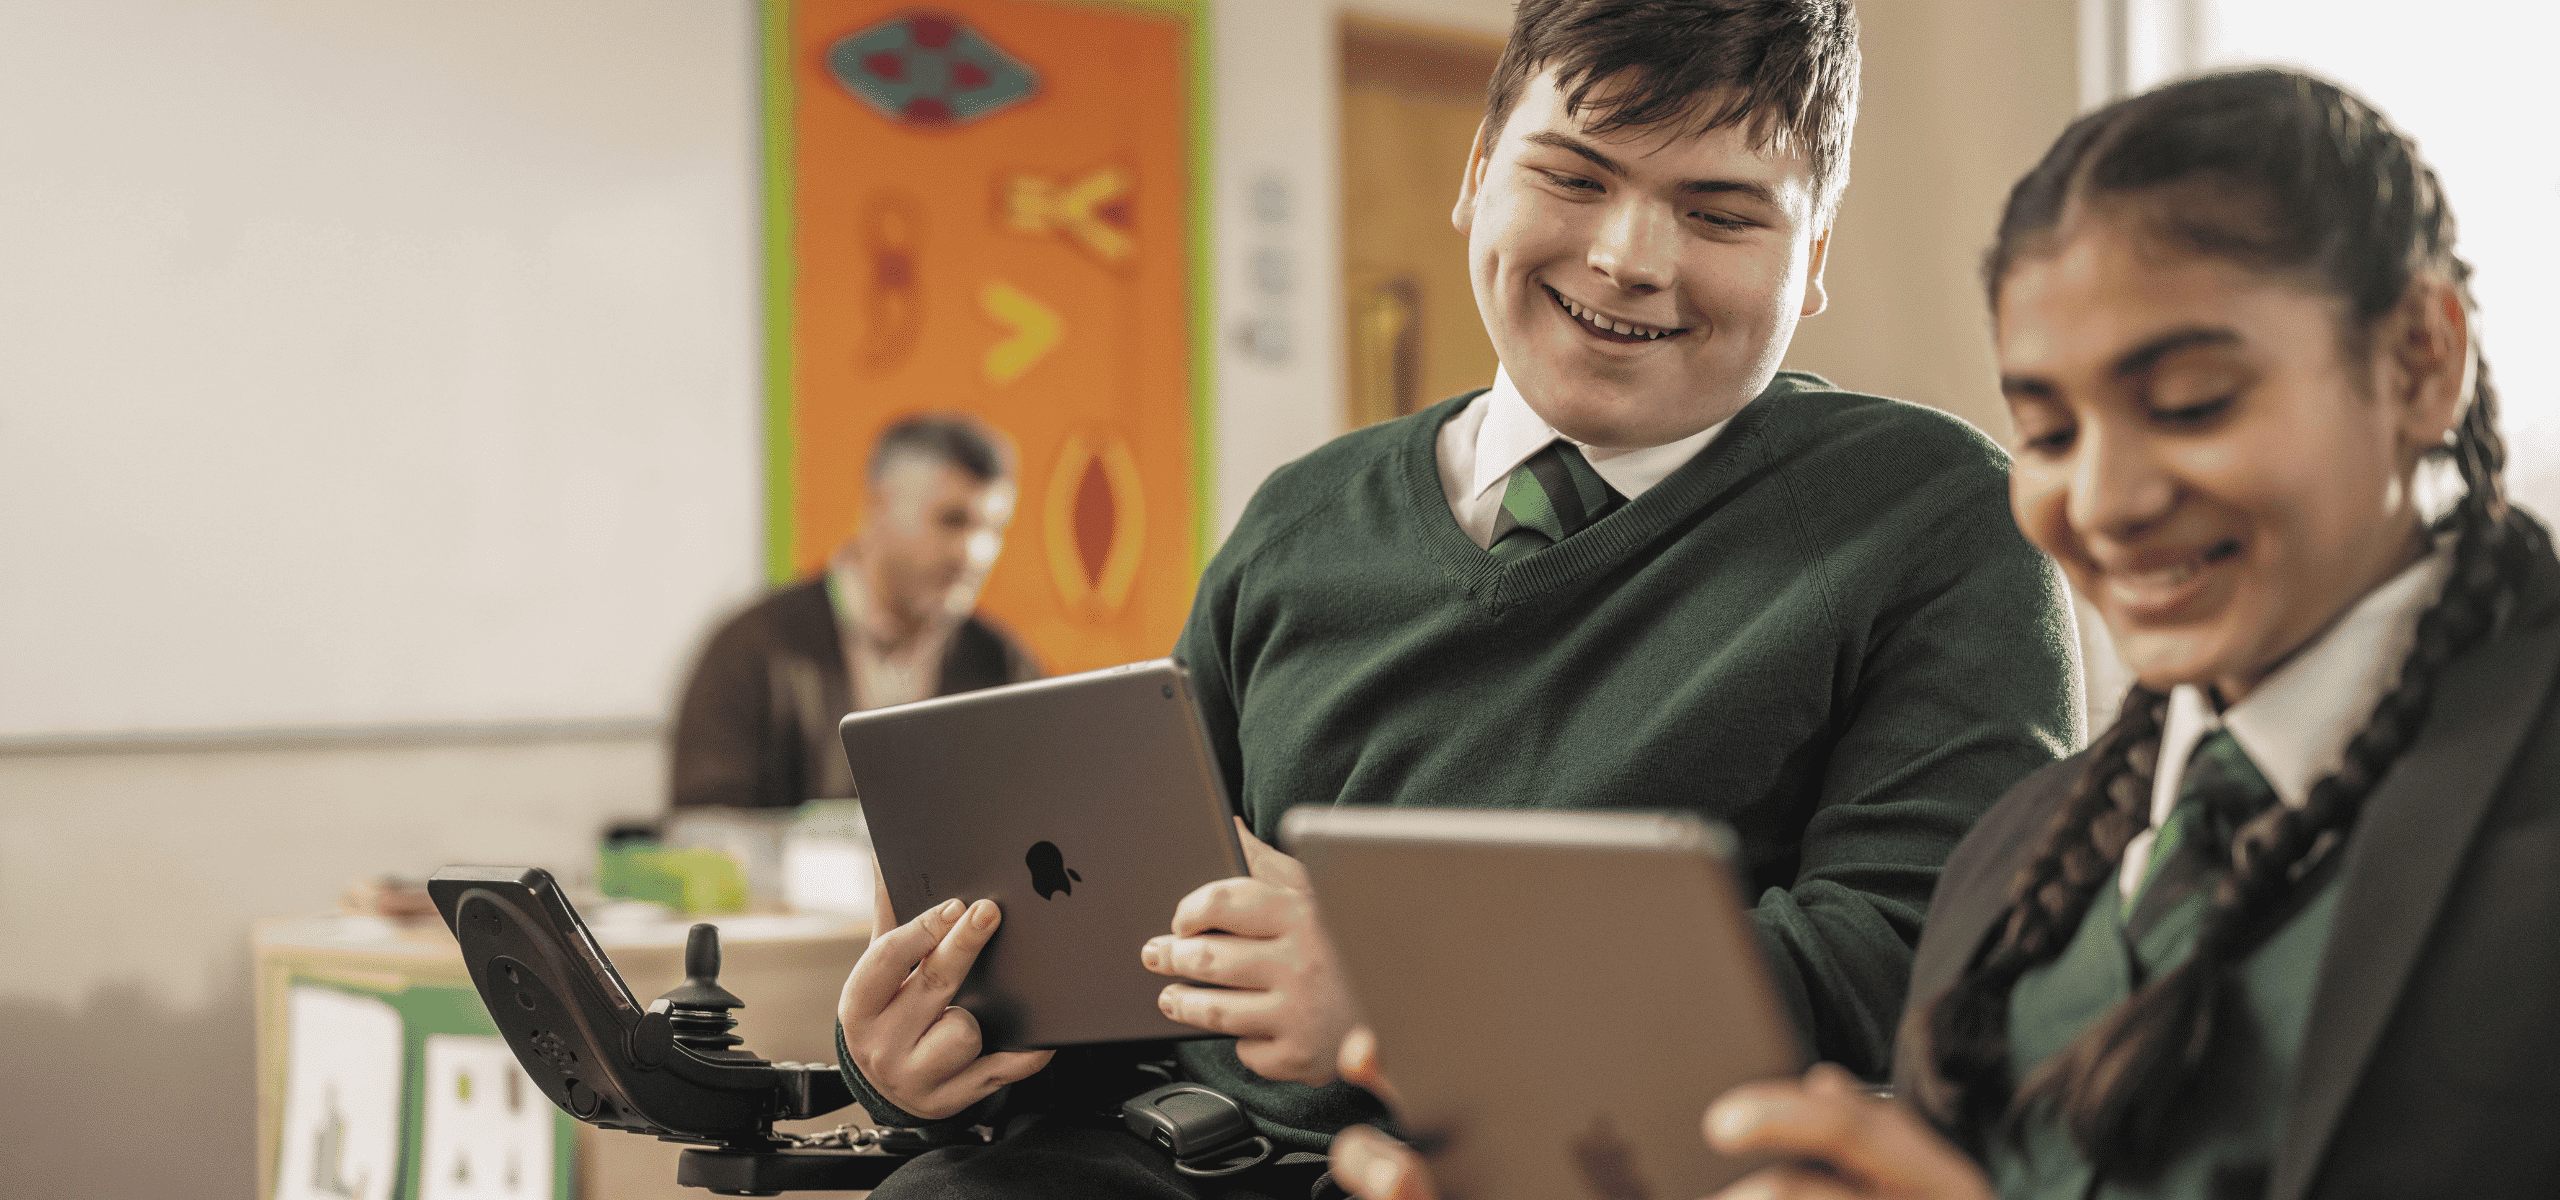 family fund - Student with mobility needs using iPad